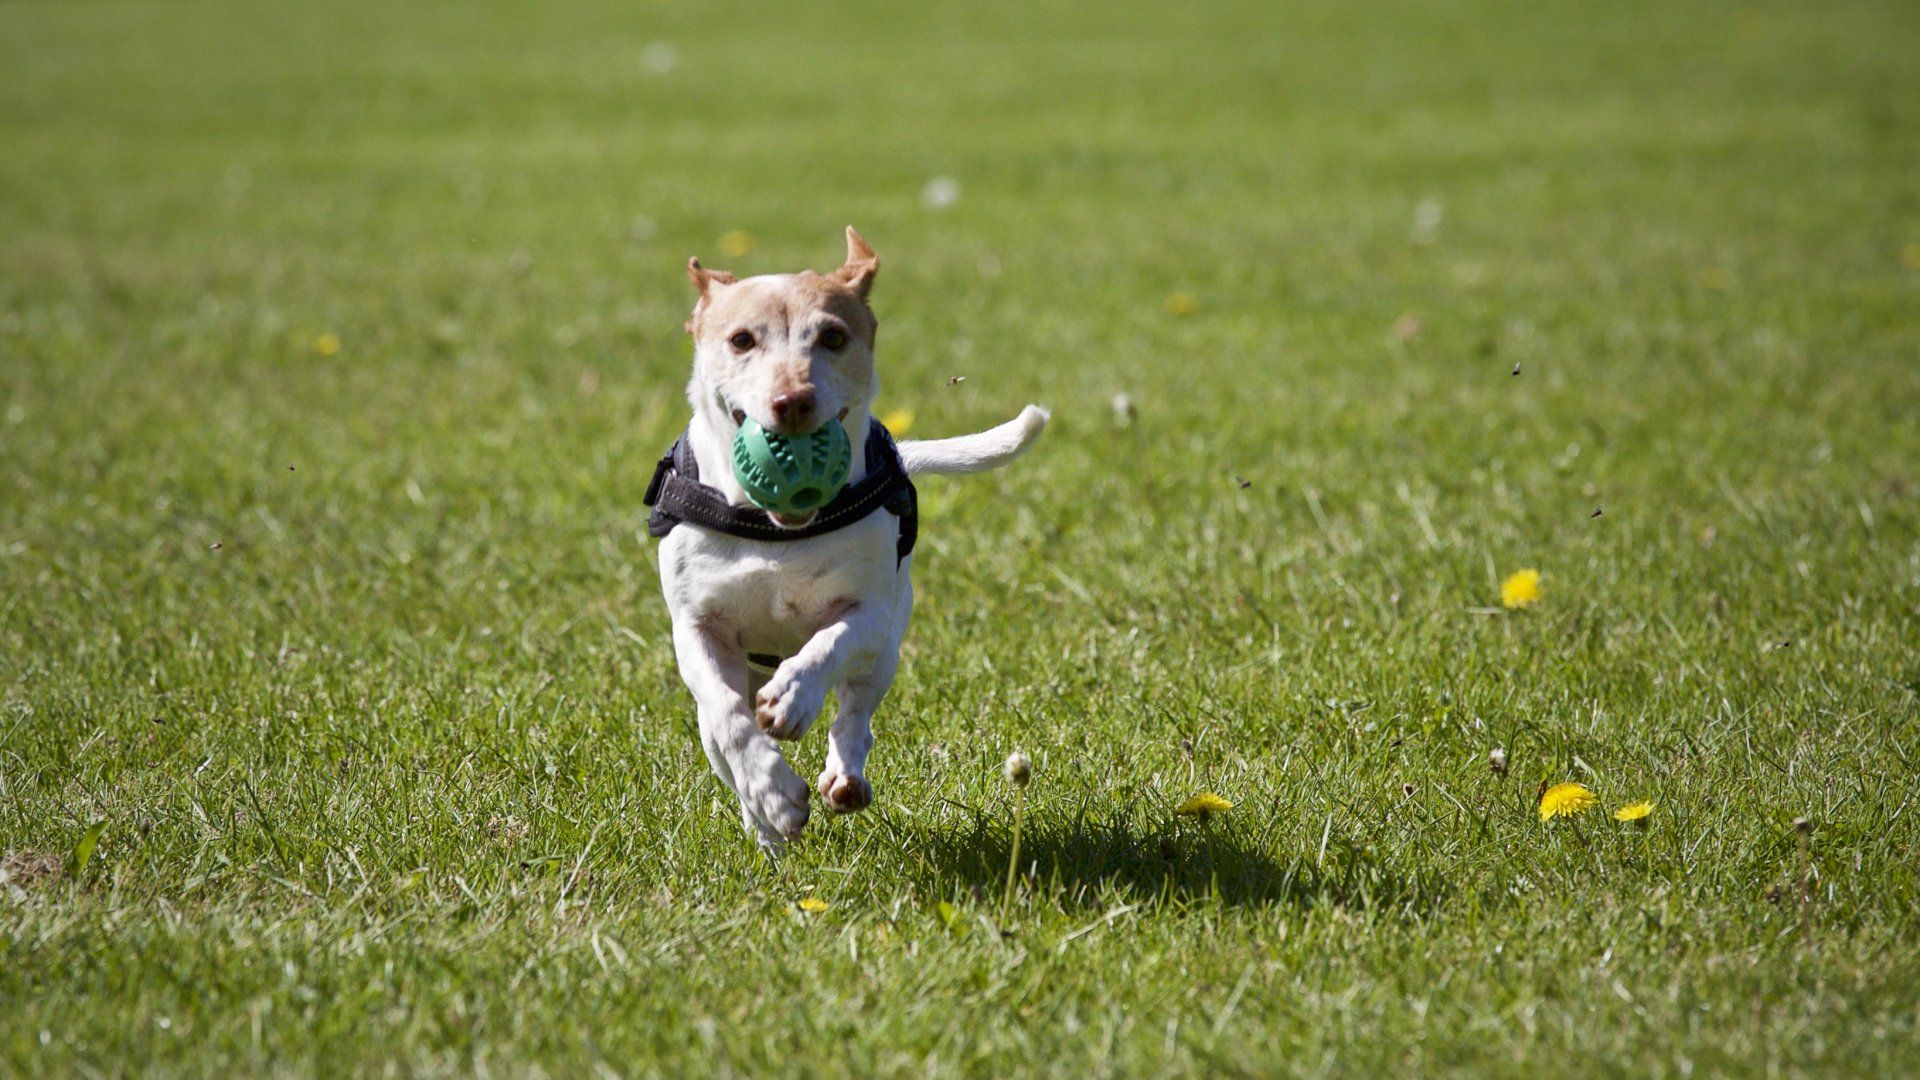 a small dog is running with a ball in its mouth .